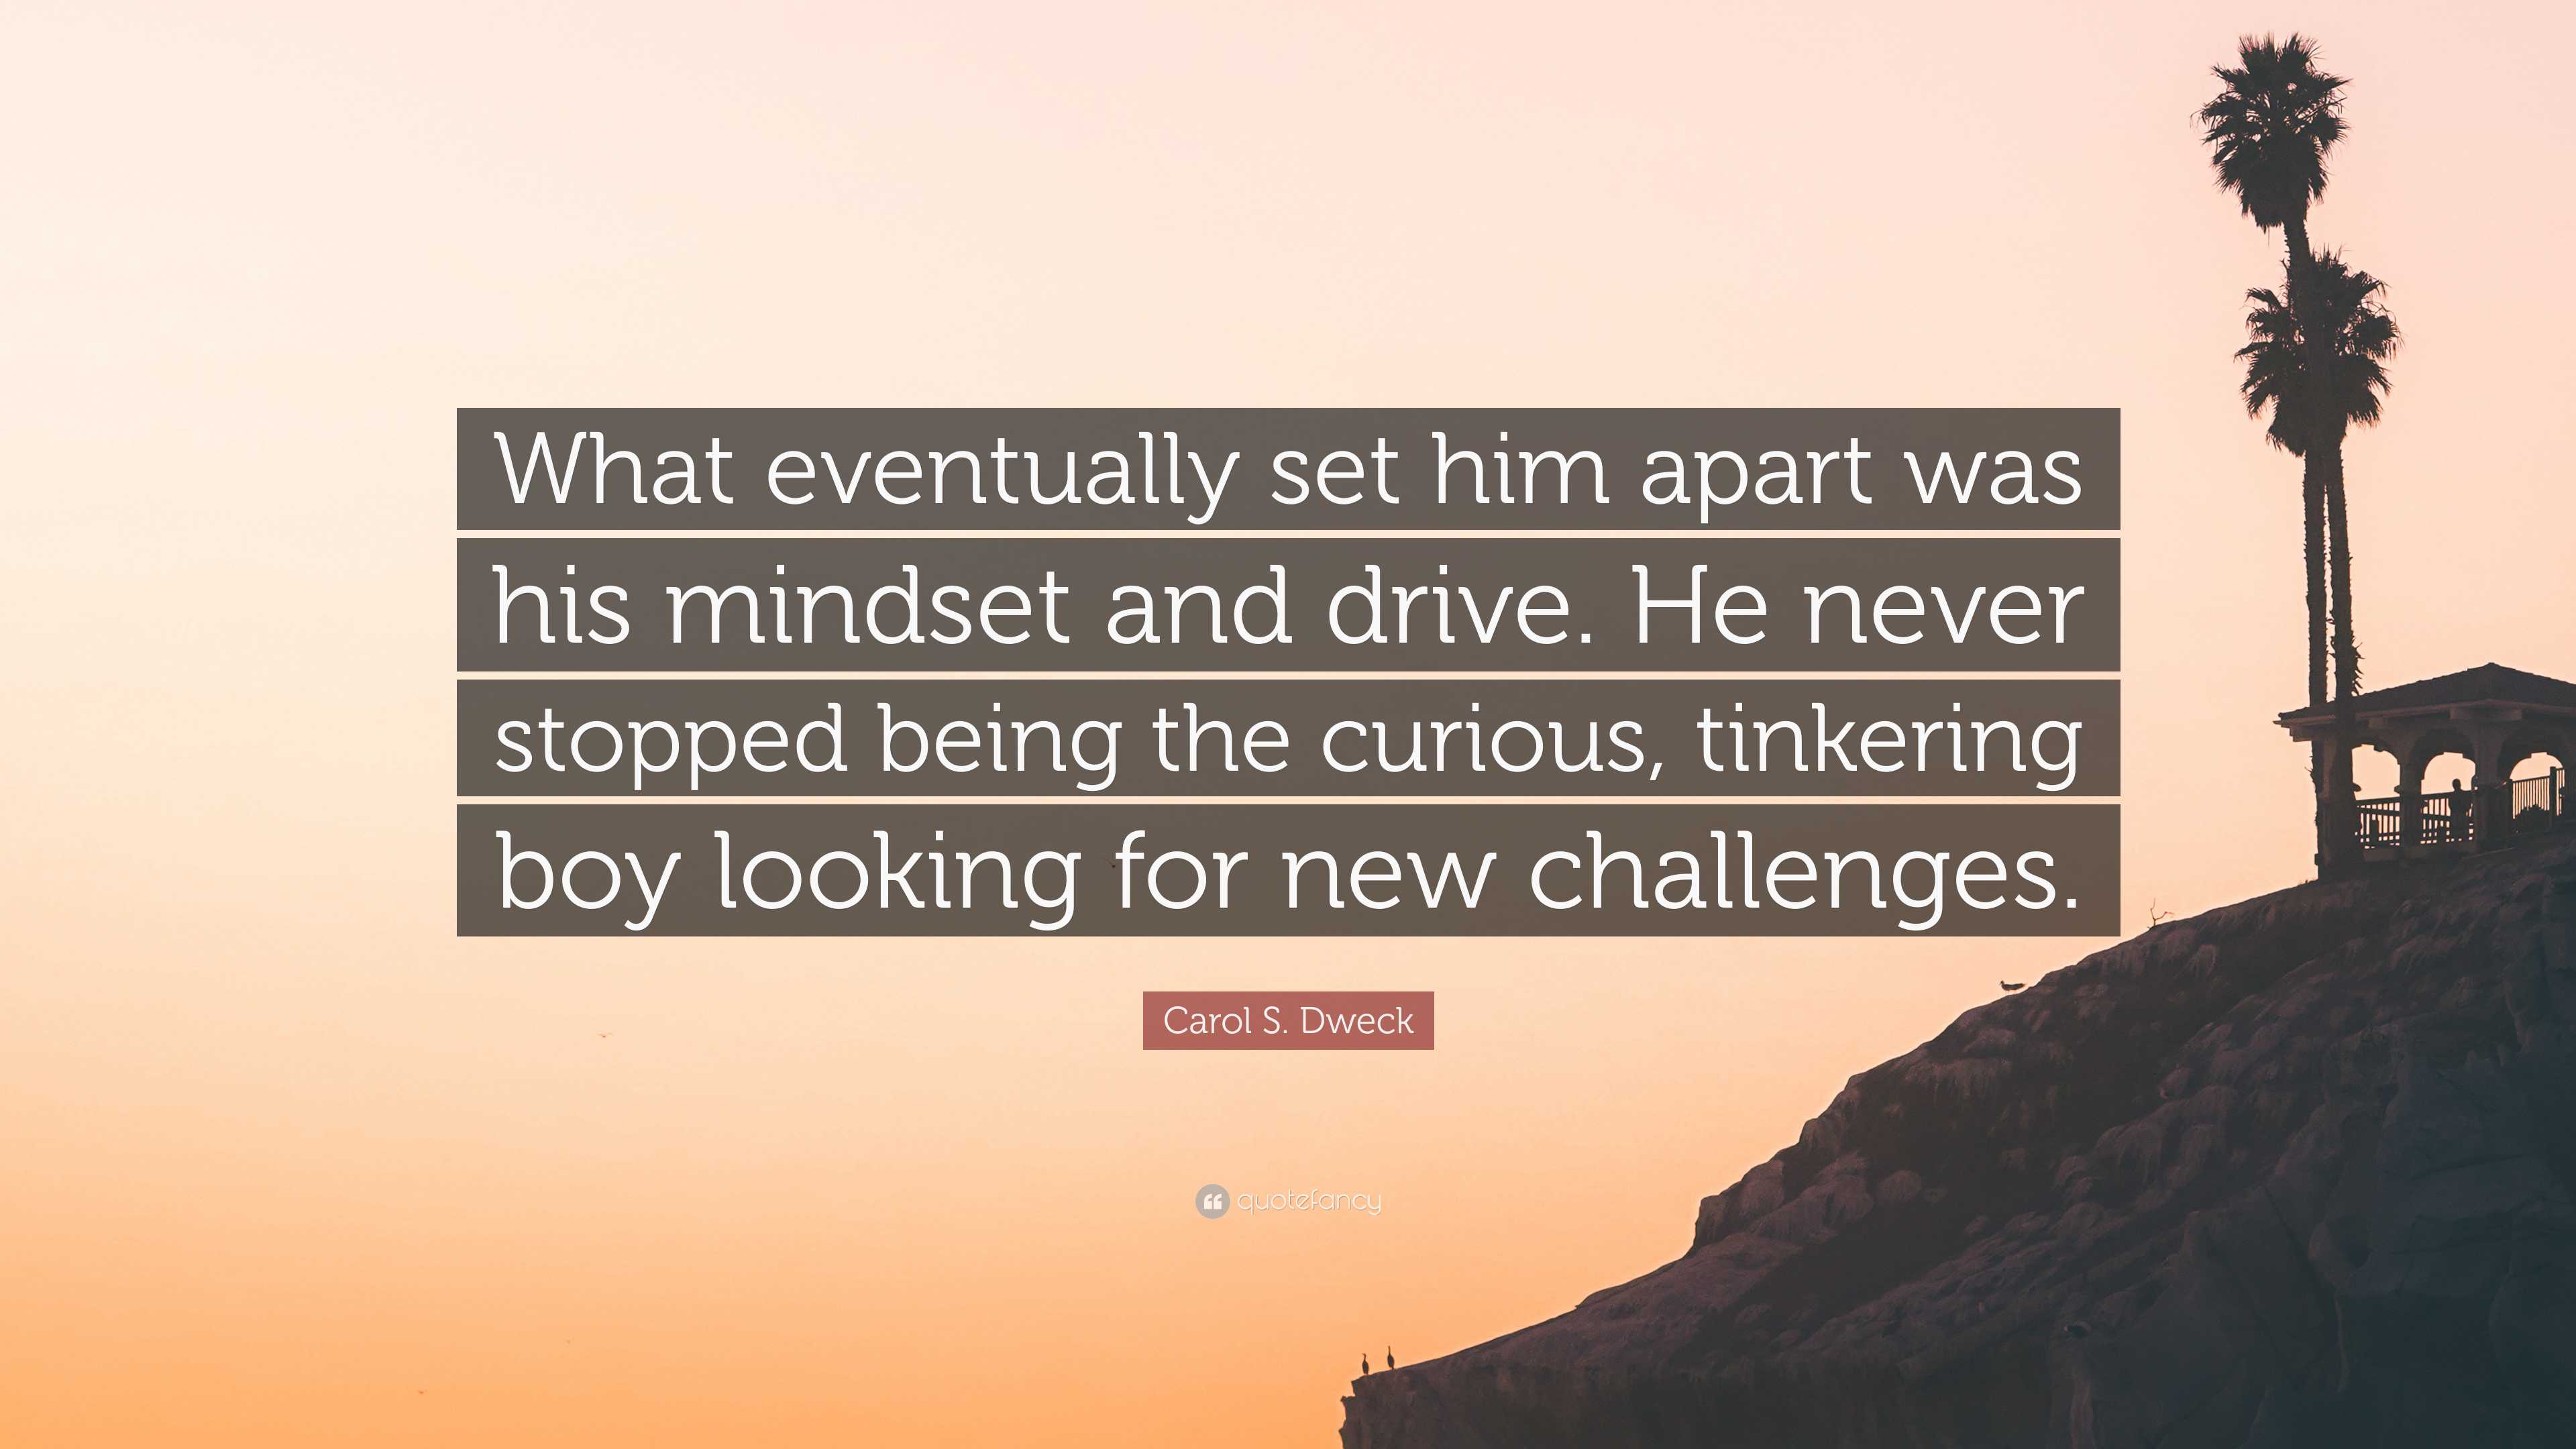 Carol S. Dweck Quote: “What eventually set him apart was his mindset and  drive. He never stopped being the curious, tinkering boy looking for n”